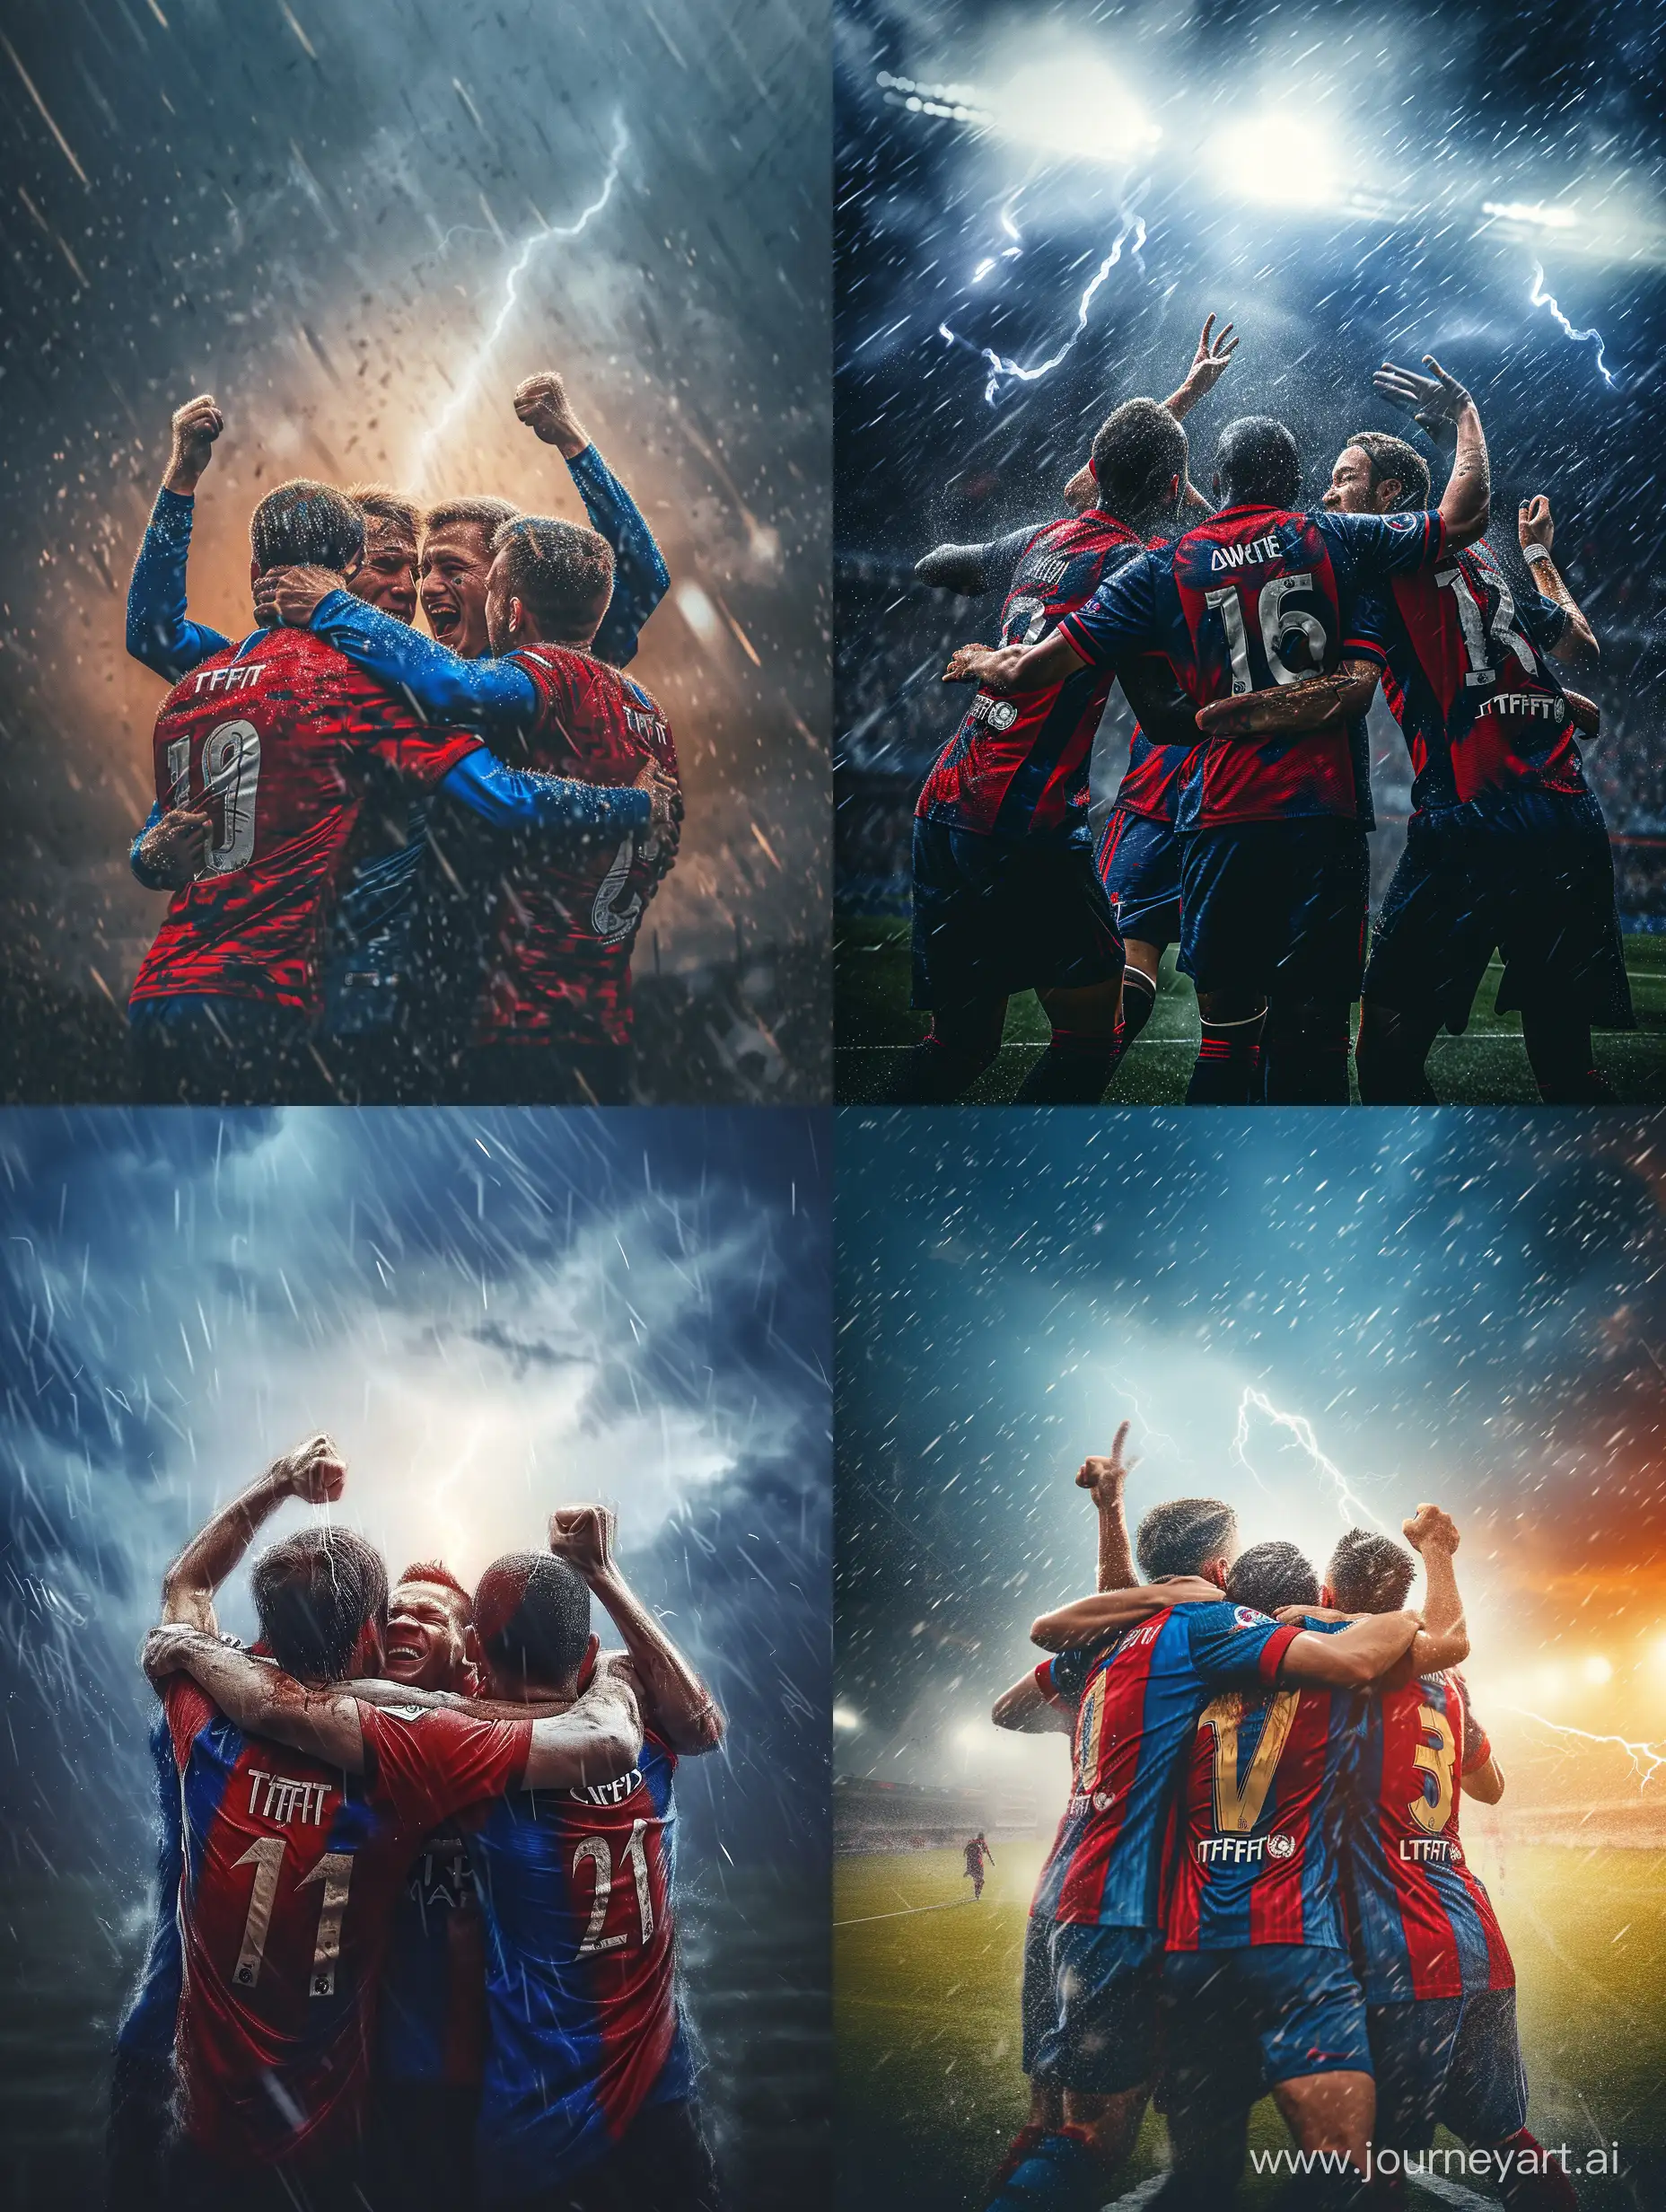 Ultra realistic, 4 soccer players do a goal celebration. hug while raising hands. red and blue jersey. there is 'TFFT' written on the jersey. on the syntactic field. storm and lightning background. refraction of sunlight canon eos-id x mark iii dslr --v 6.0